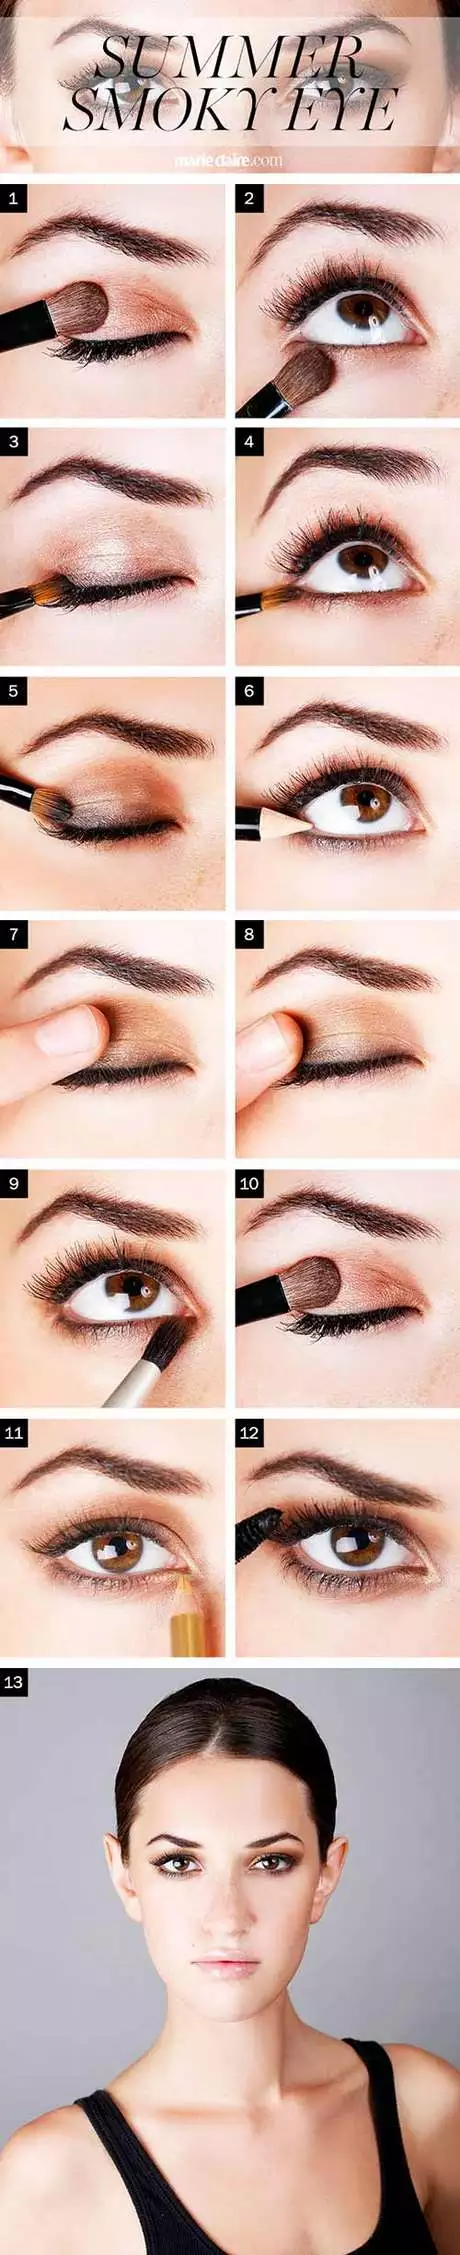 tutorial-smokey-eye-makeup-98_10-3 Tutorial smokey eye make-up